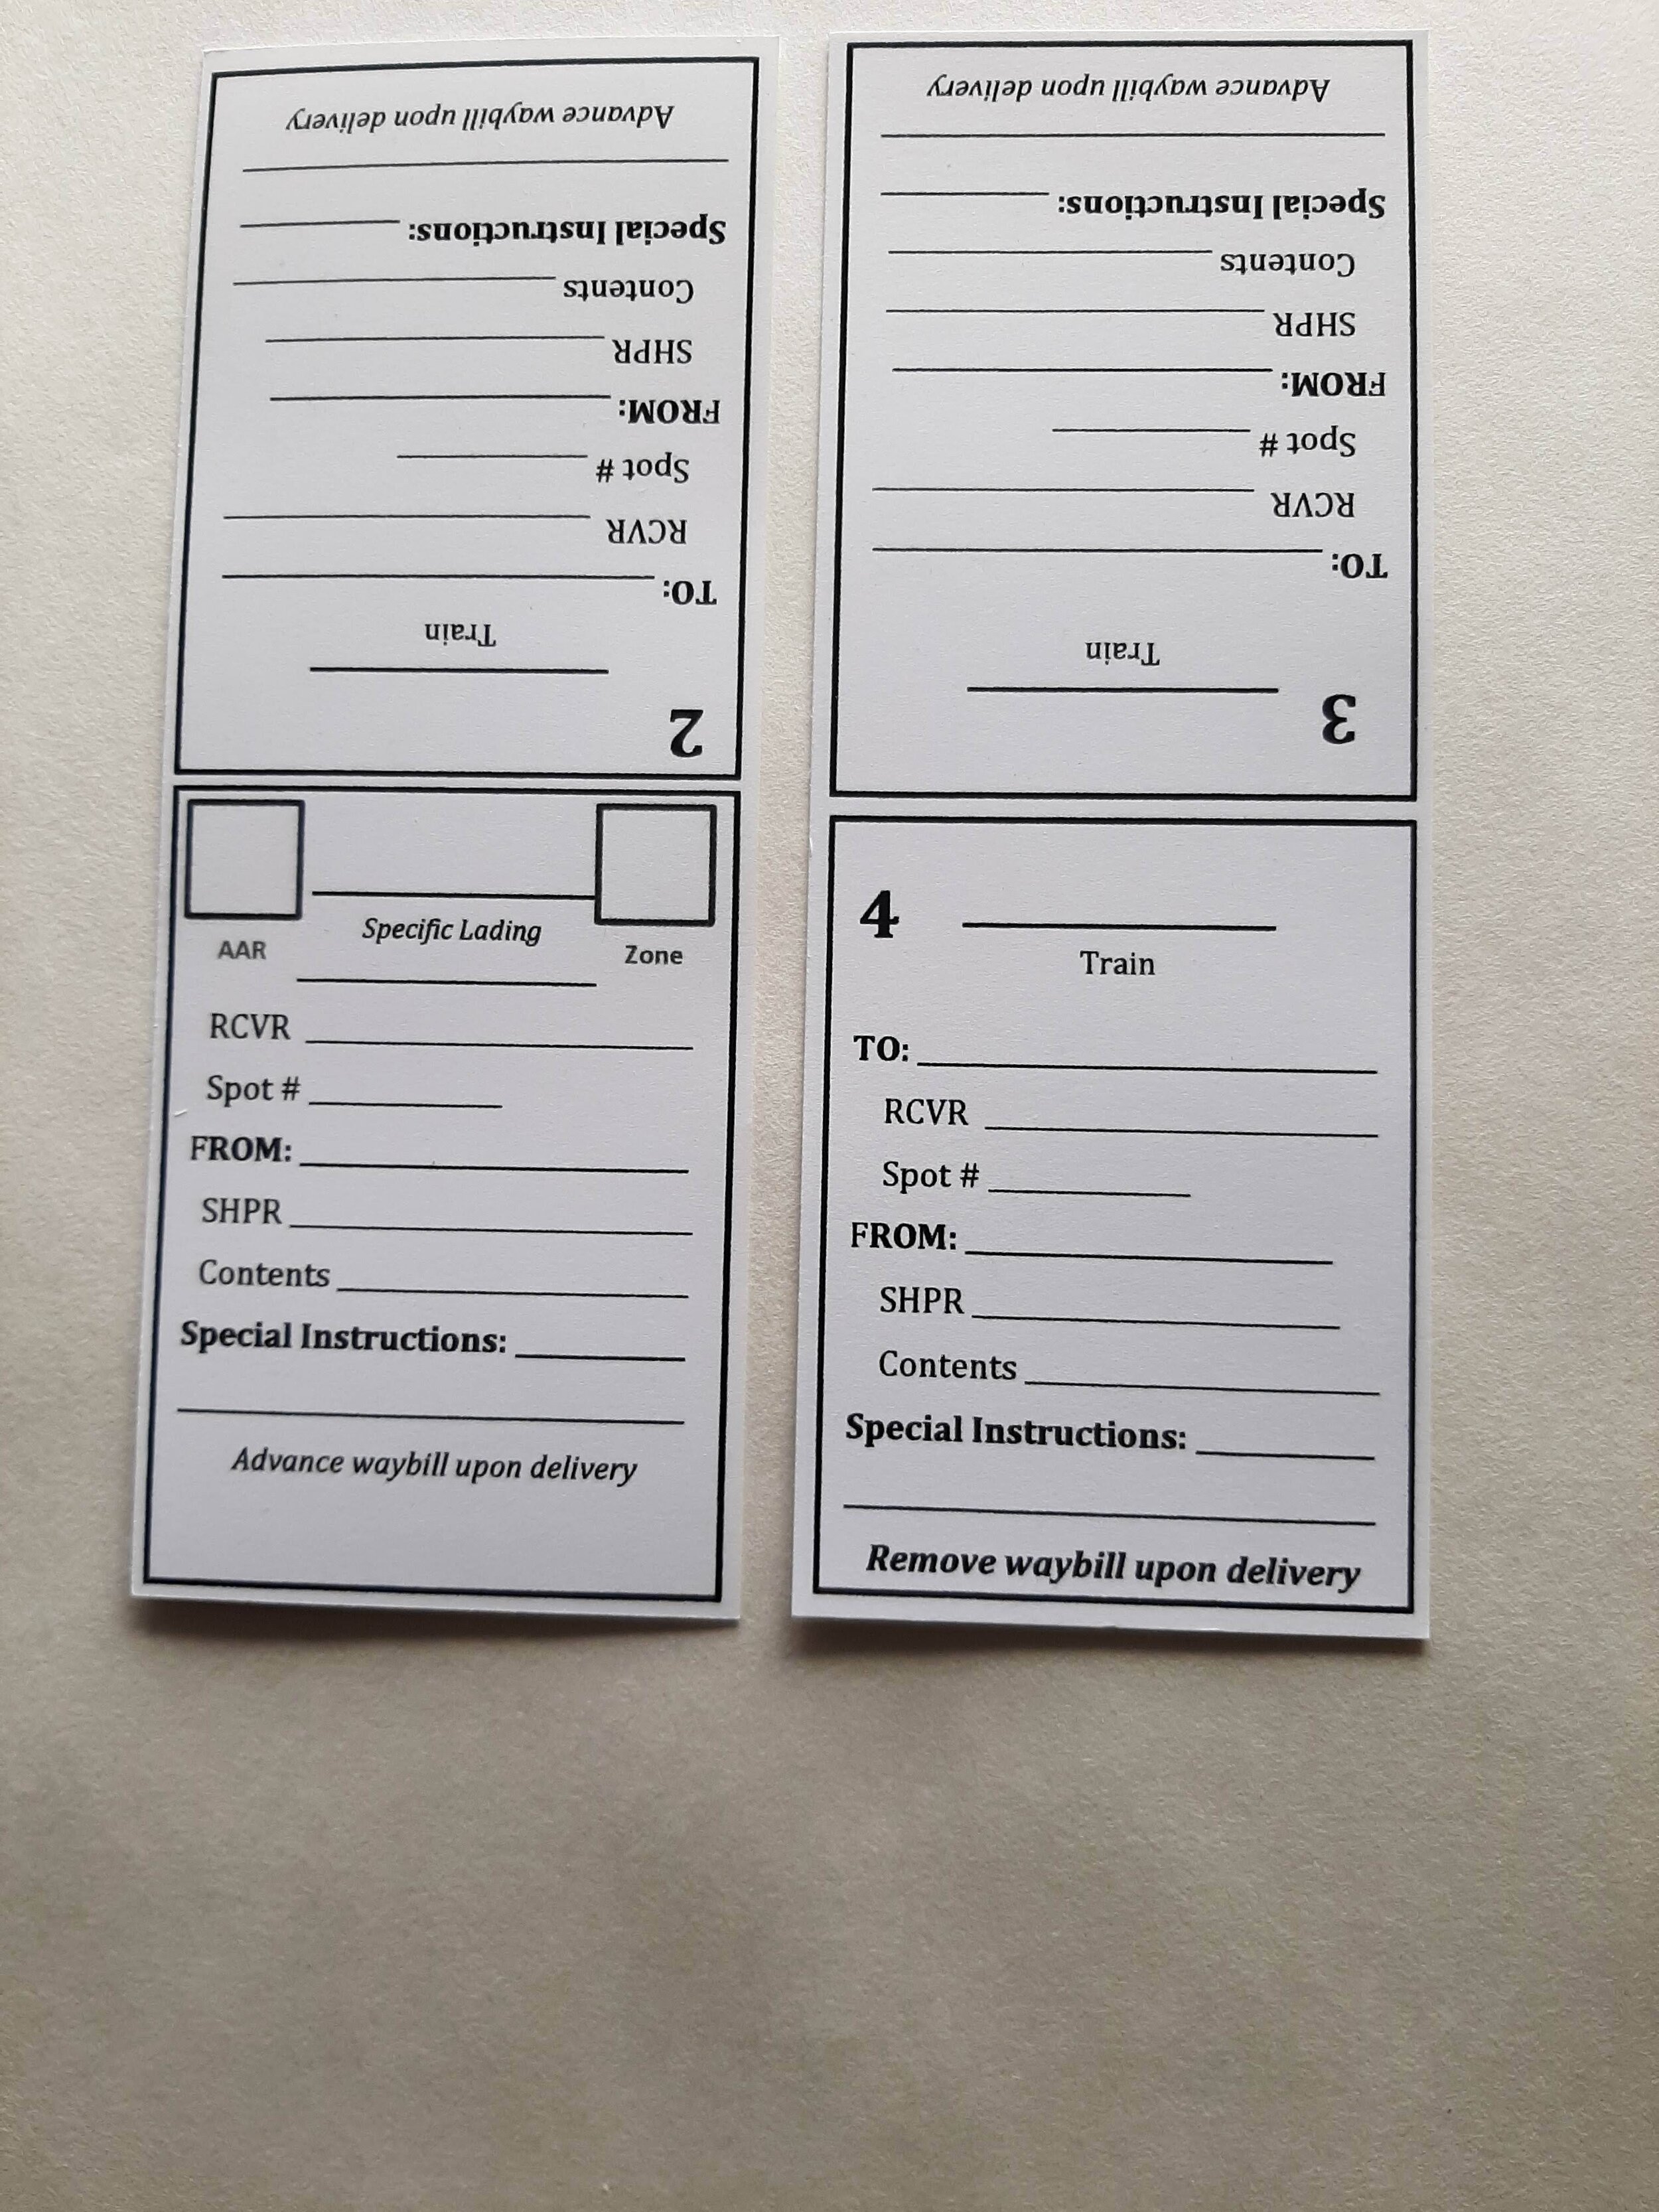  Waybills were also done in Word and printed/cut at Kinkos. Worth the cost. Because the car cards are “bottom loaded” the data is arranged in this manner. These are 4 position waybills with the first position called out by the AAR code for the car ty